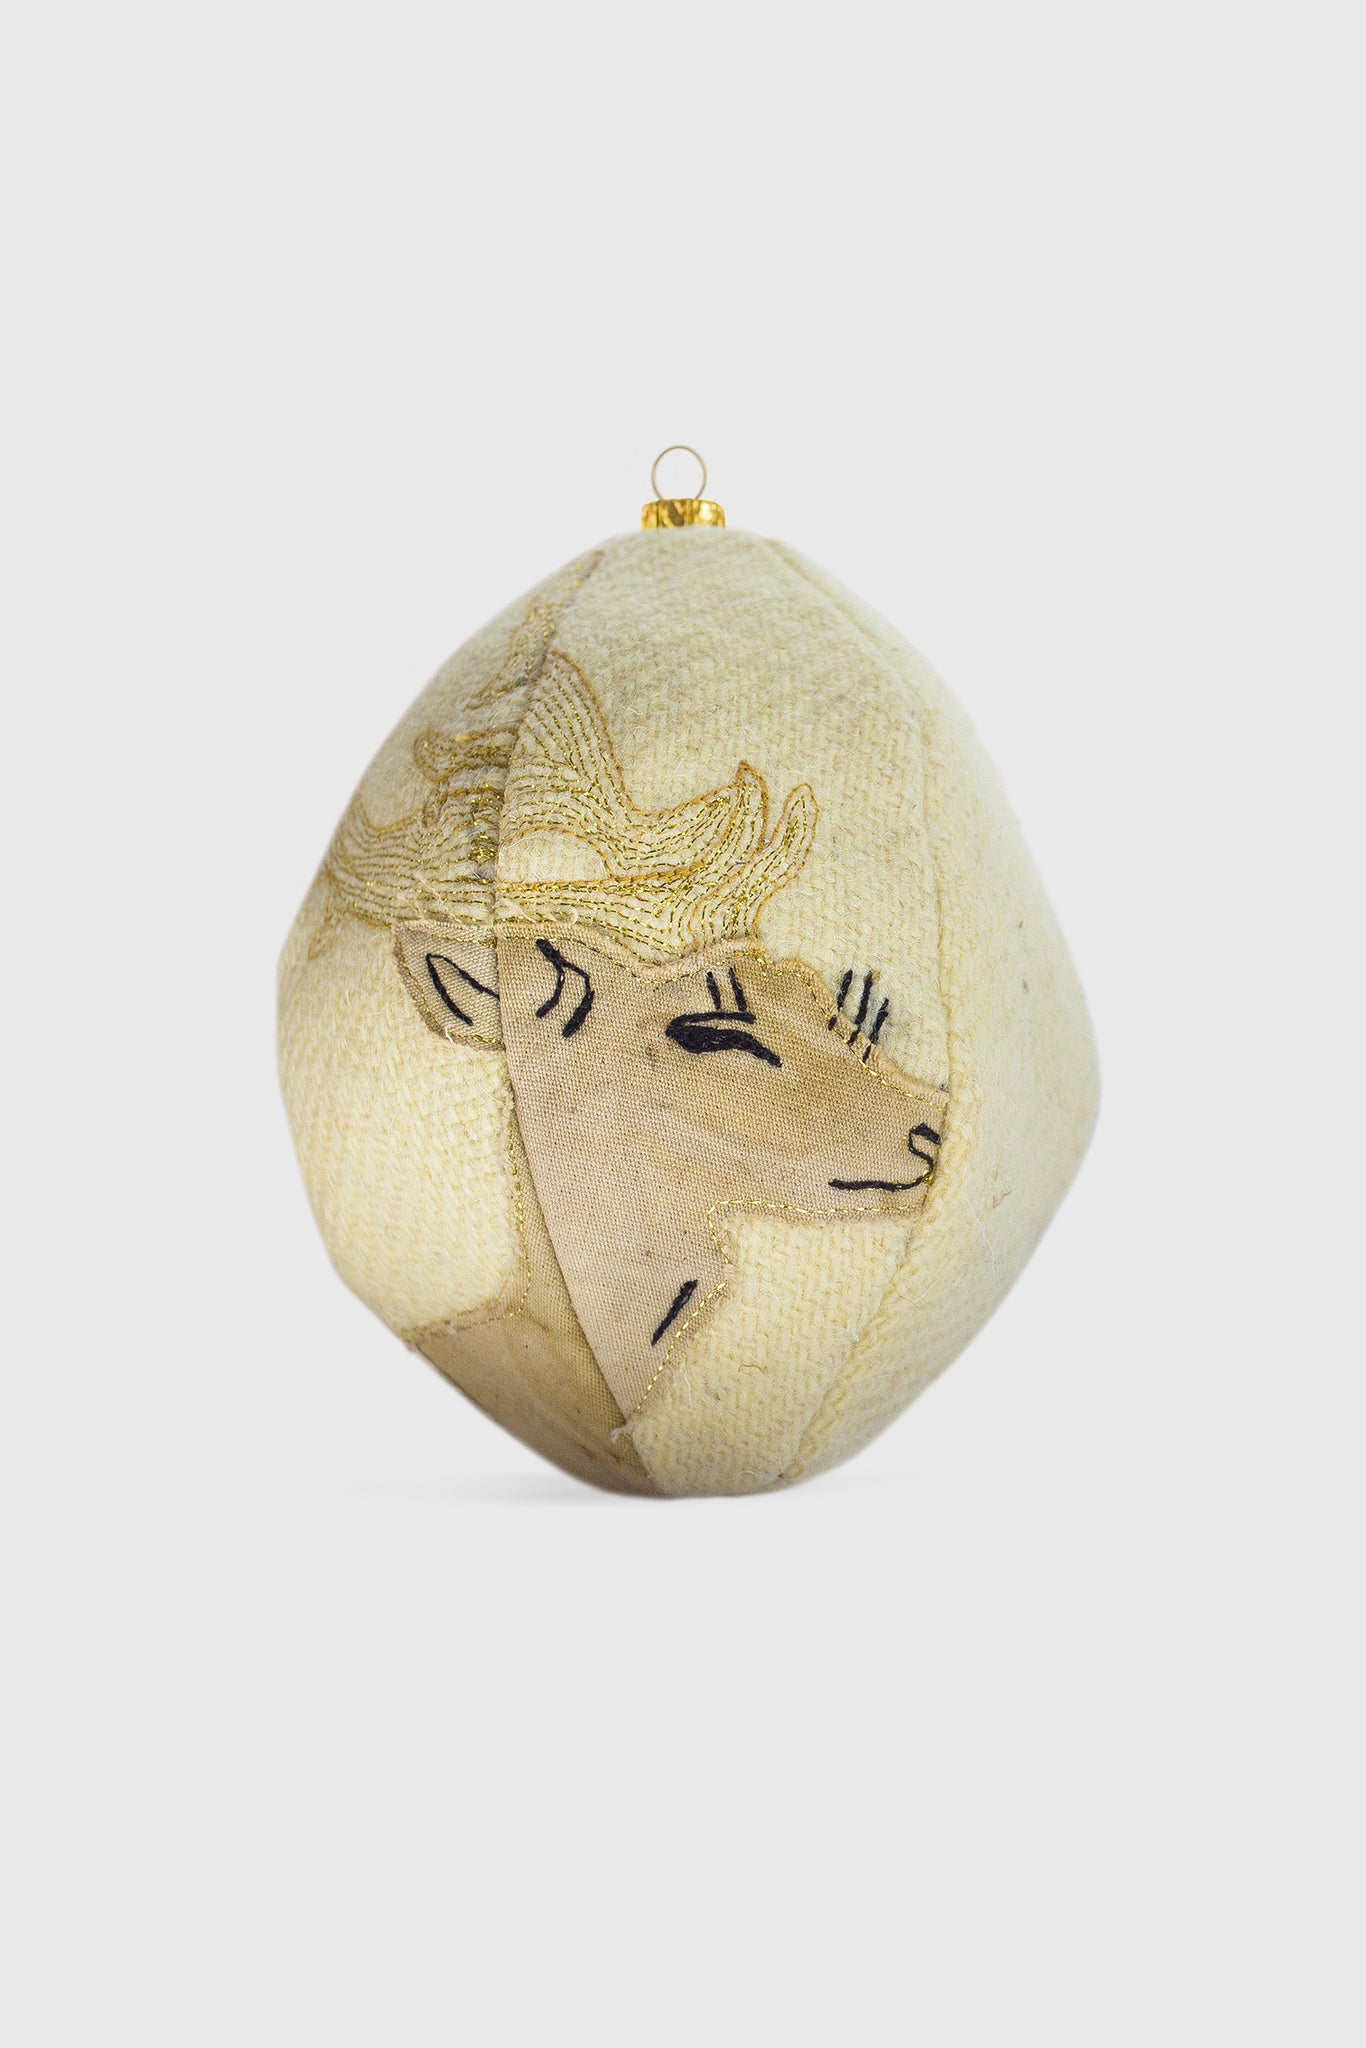 Ruxandra, feminine globe ornament, delicate embroidery, beautiful deer, gold thread on white wool, creative Xmas decorations, family Christmas gifts, pet friendly 